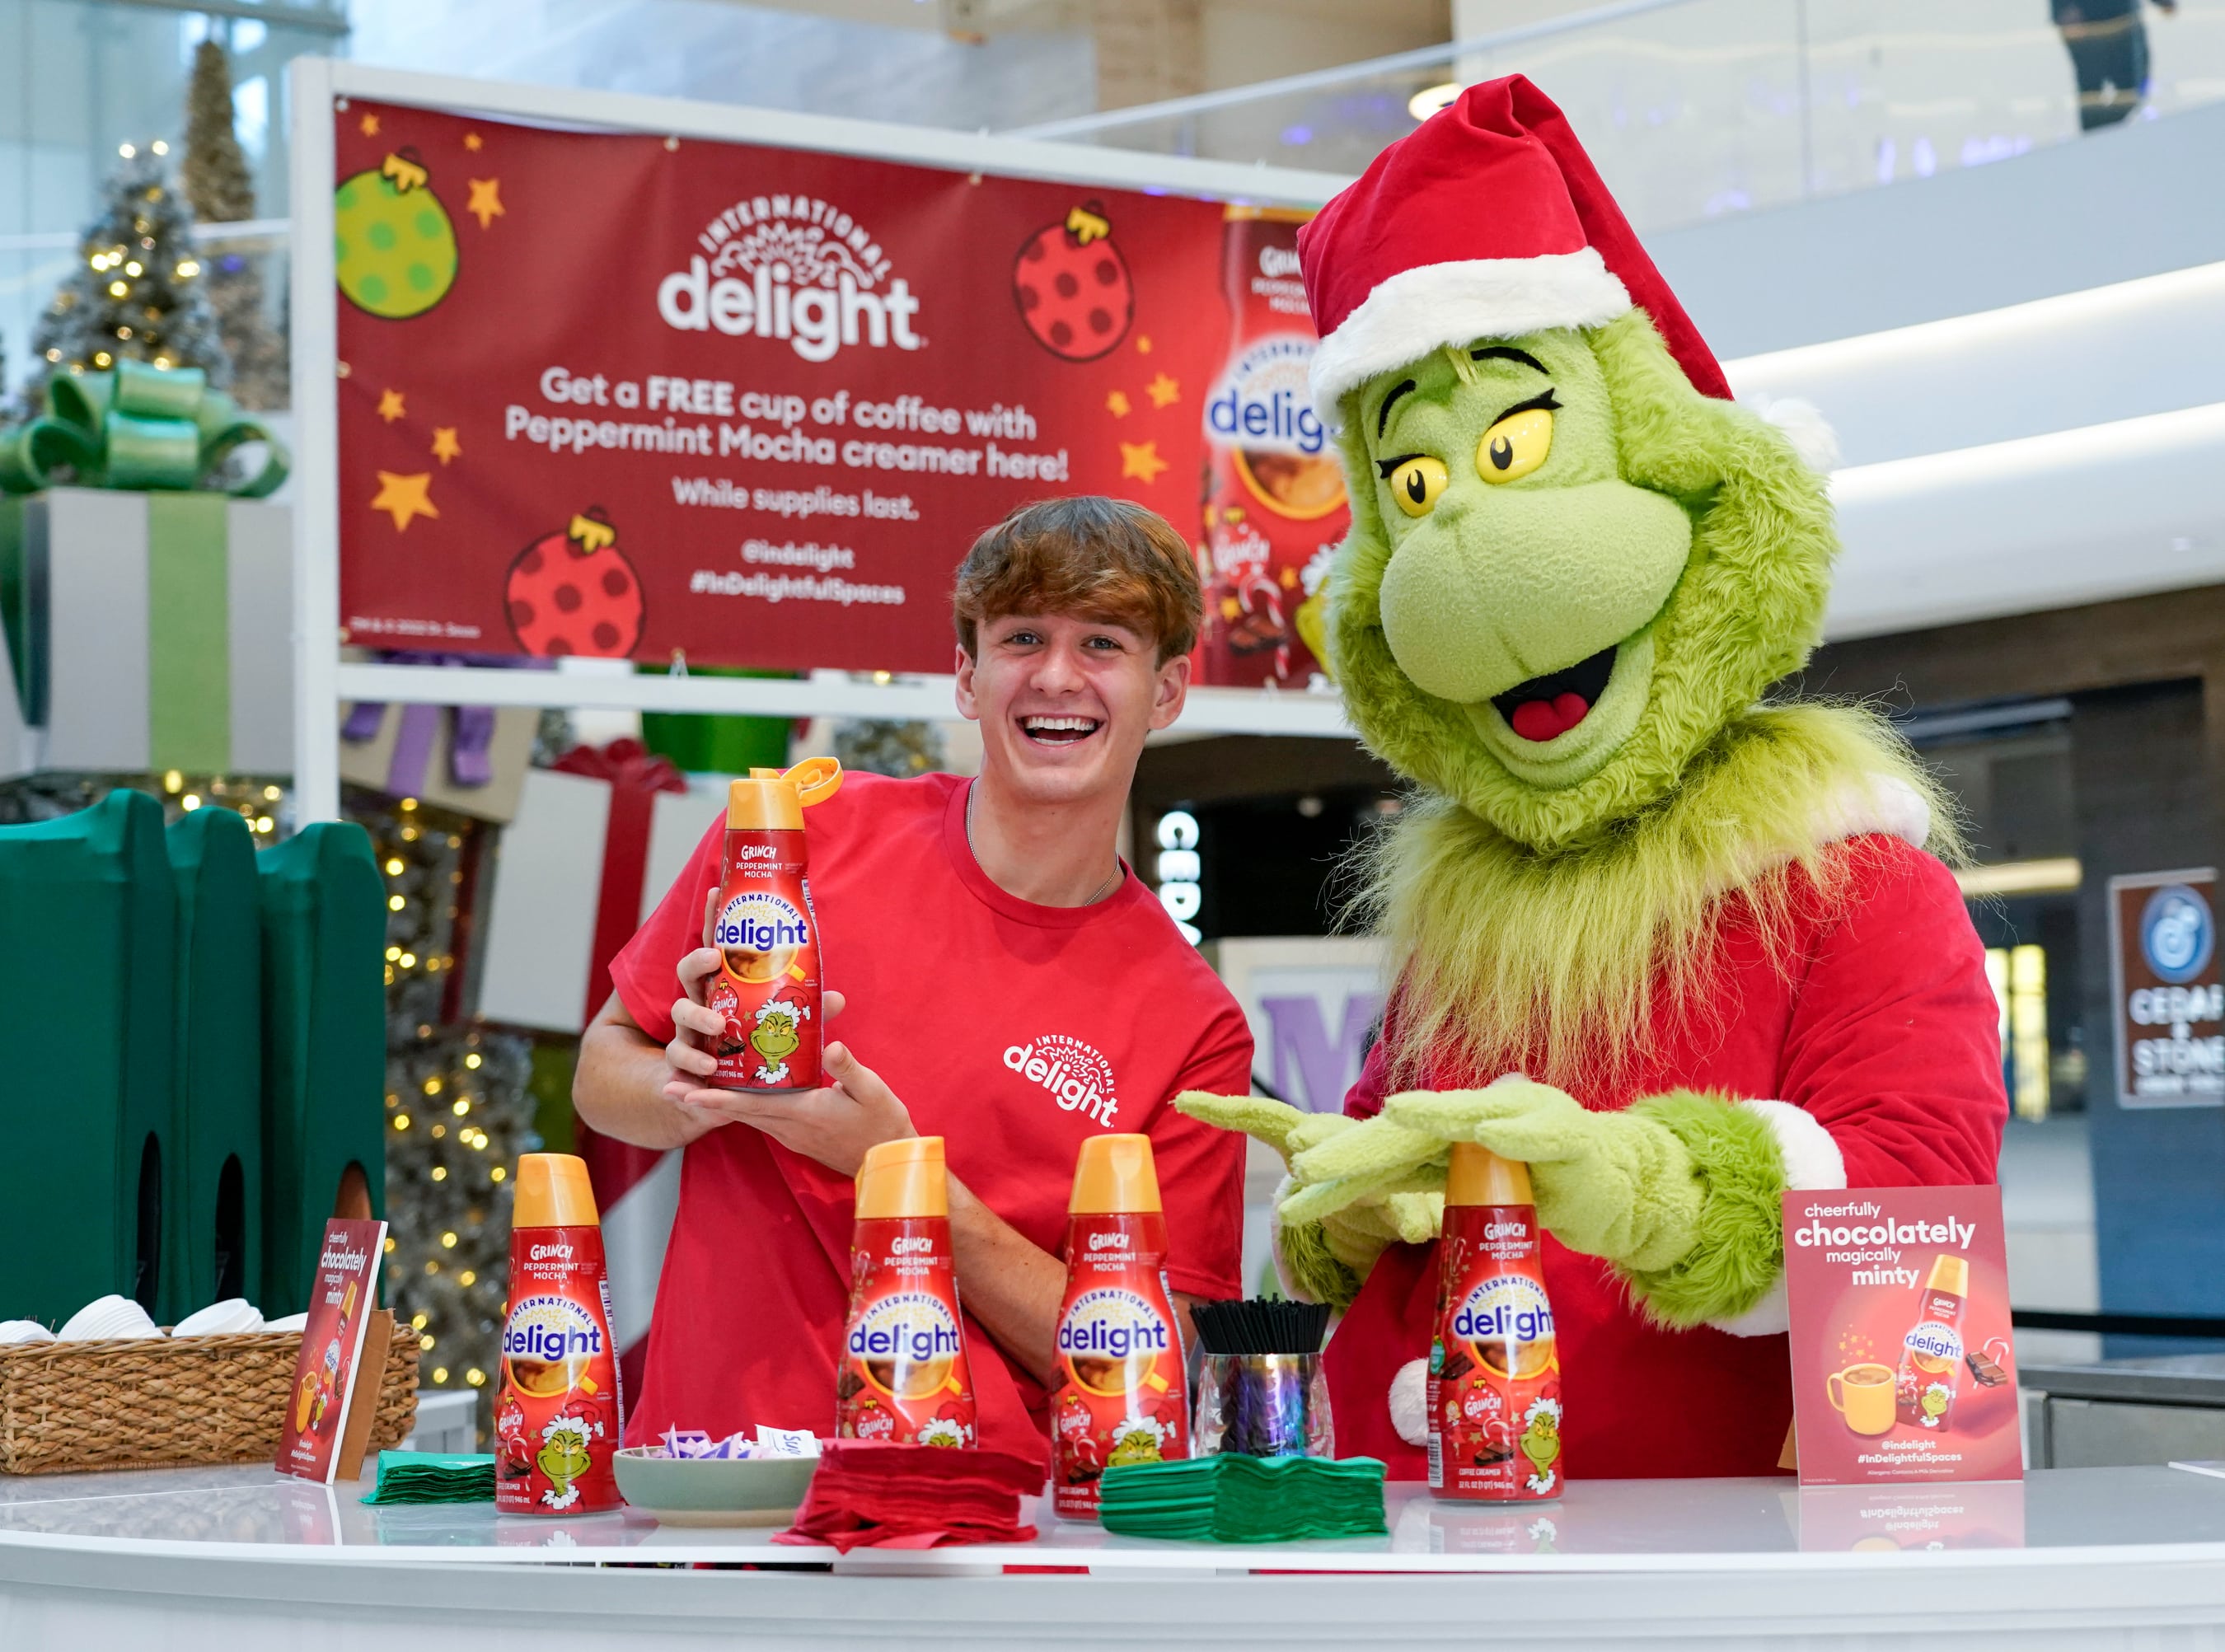 The Grinch and TikTok star, Carter Kench, serve up coffee with International Delight Grinch Peppermint Mocha creamer at Mall of America on Thursday, Dec. 8, 2022, in Minneapolis.